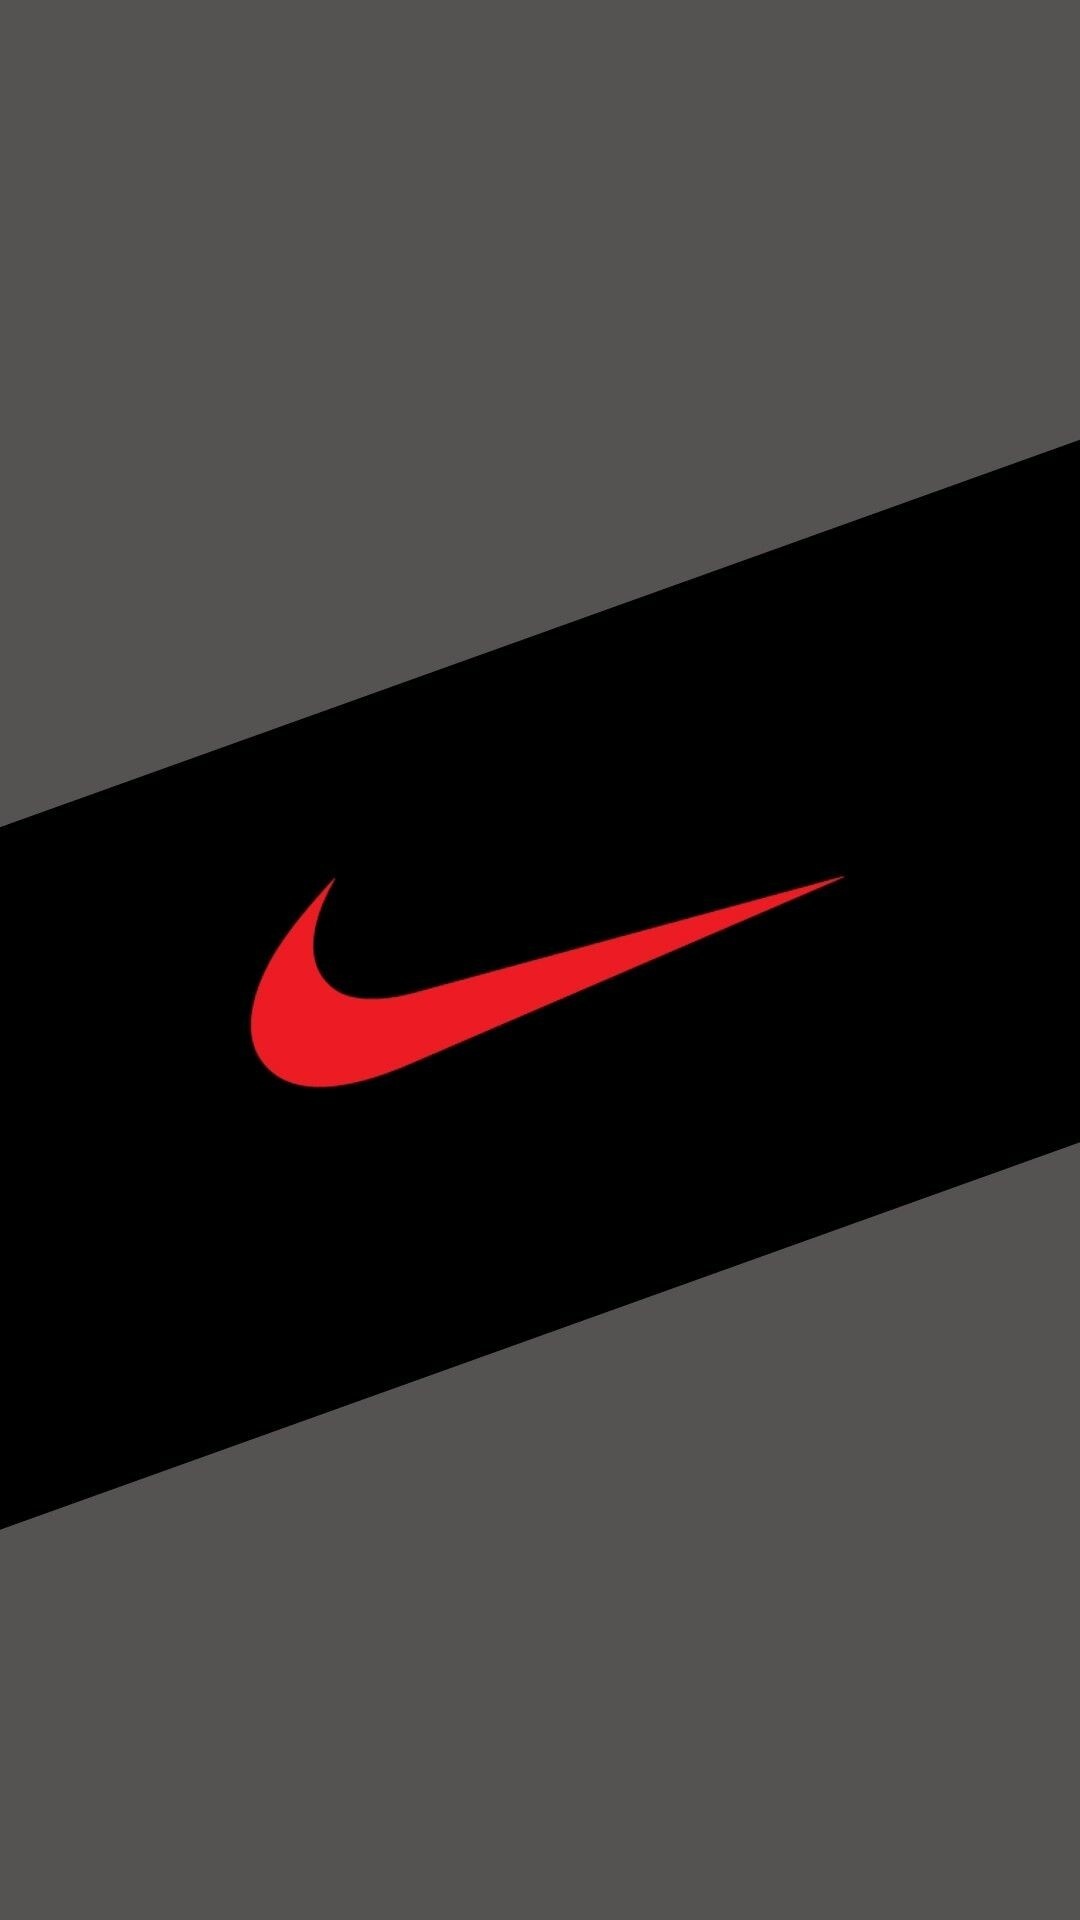 Nike: Swoosh, One of the most recognizable brand logos in the world. 1080x1920 Full HD Wallpaper.